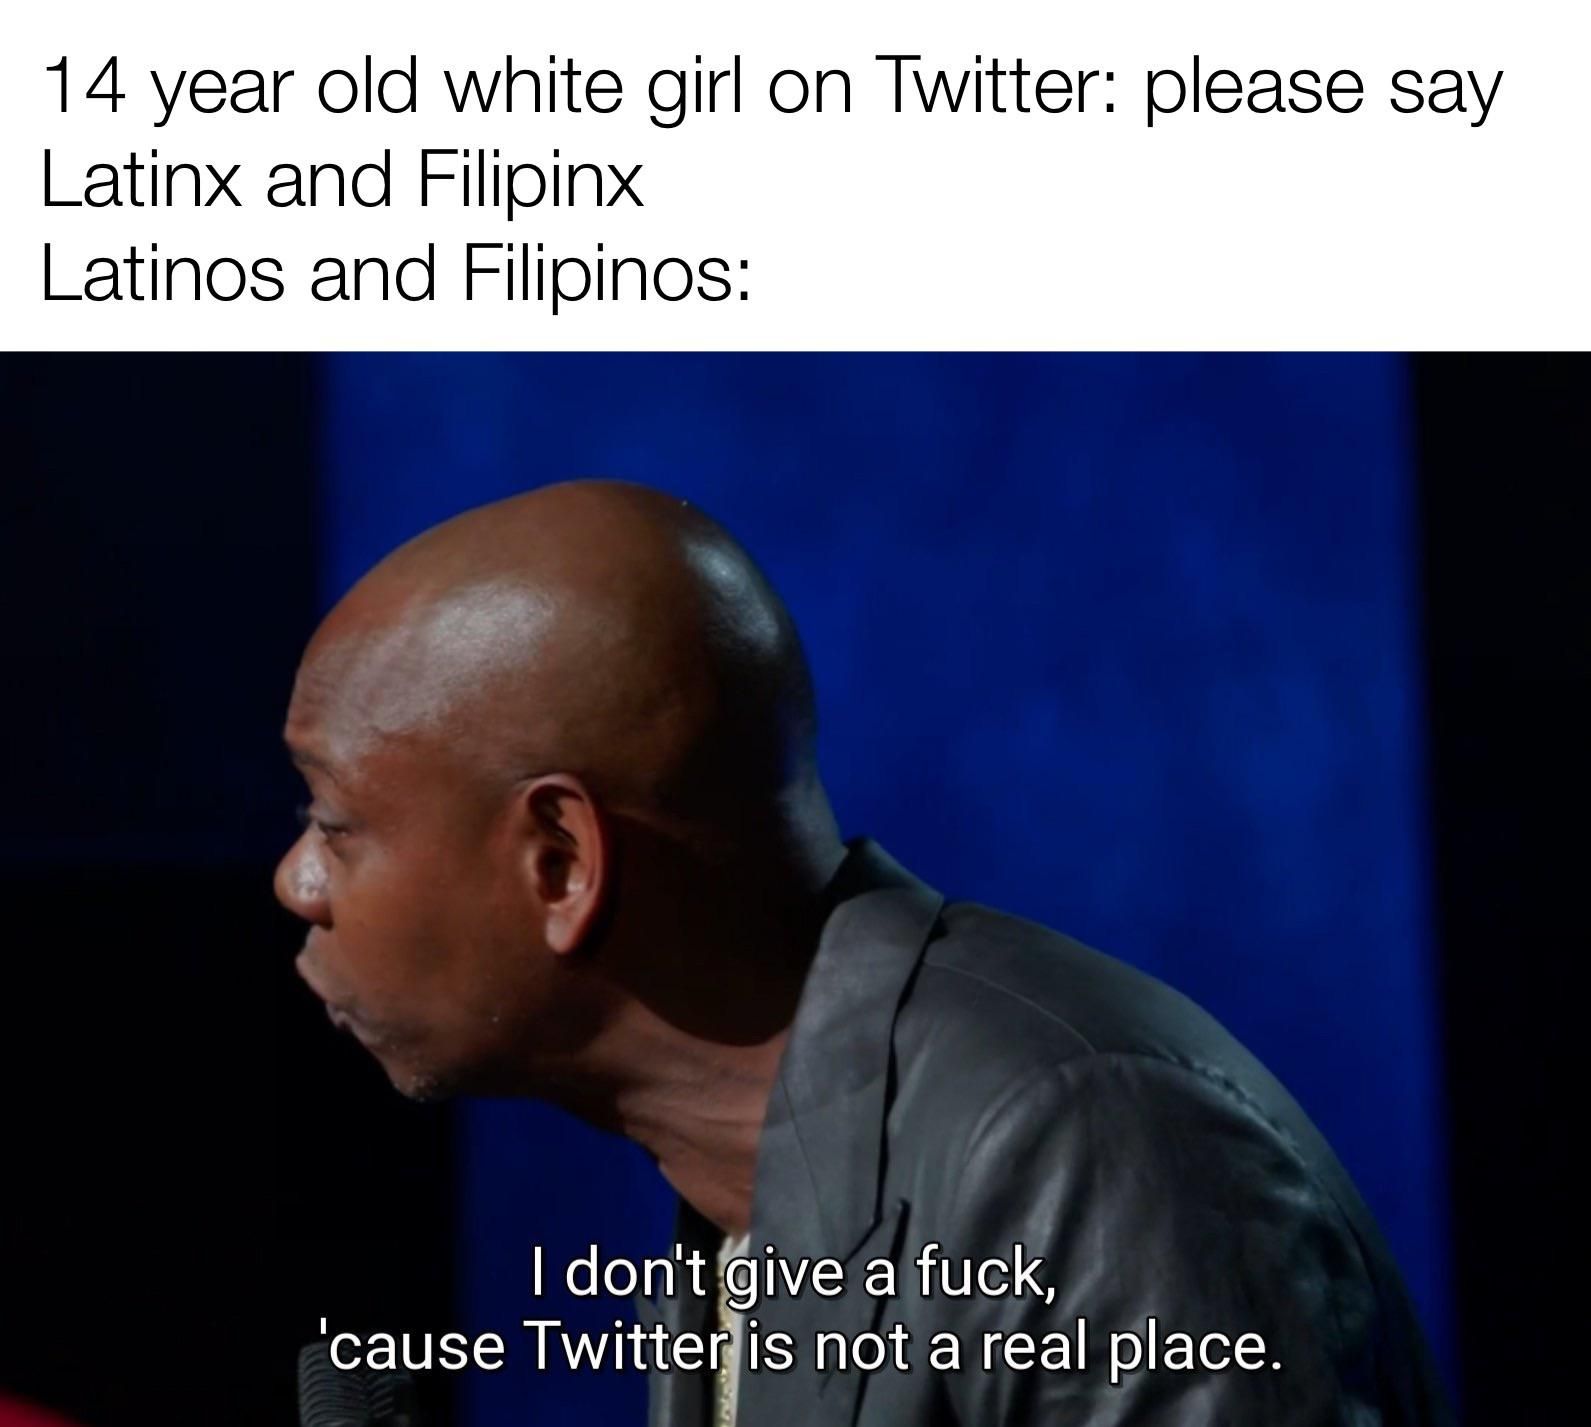 Hispanic here who knows many Latinos can confirm